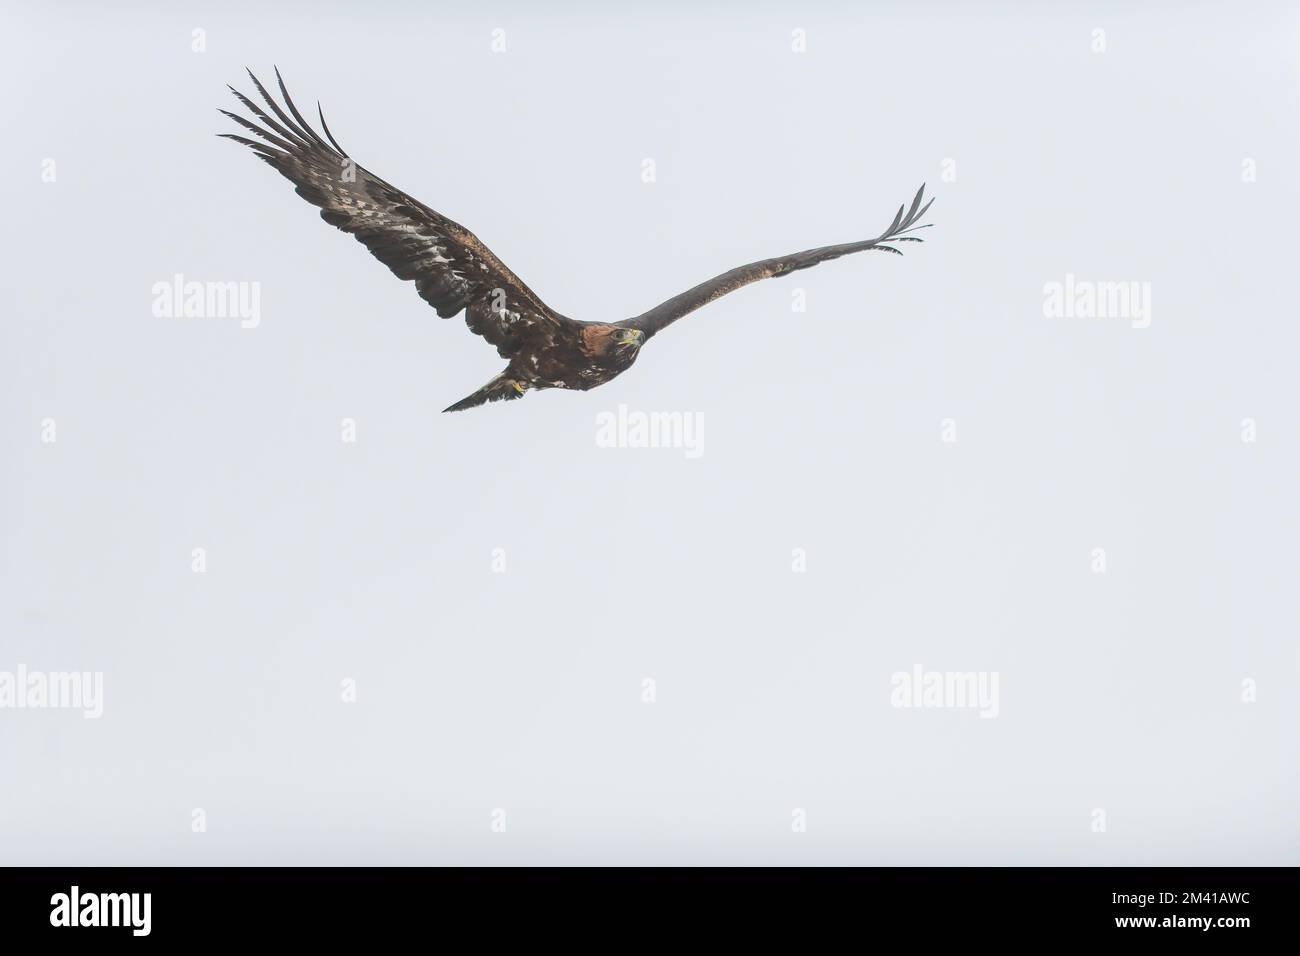 The golden eagle (Aquila chrysaetos) flying in the sky, isolated on the background. Stock Photo